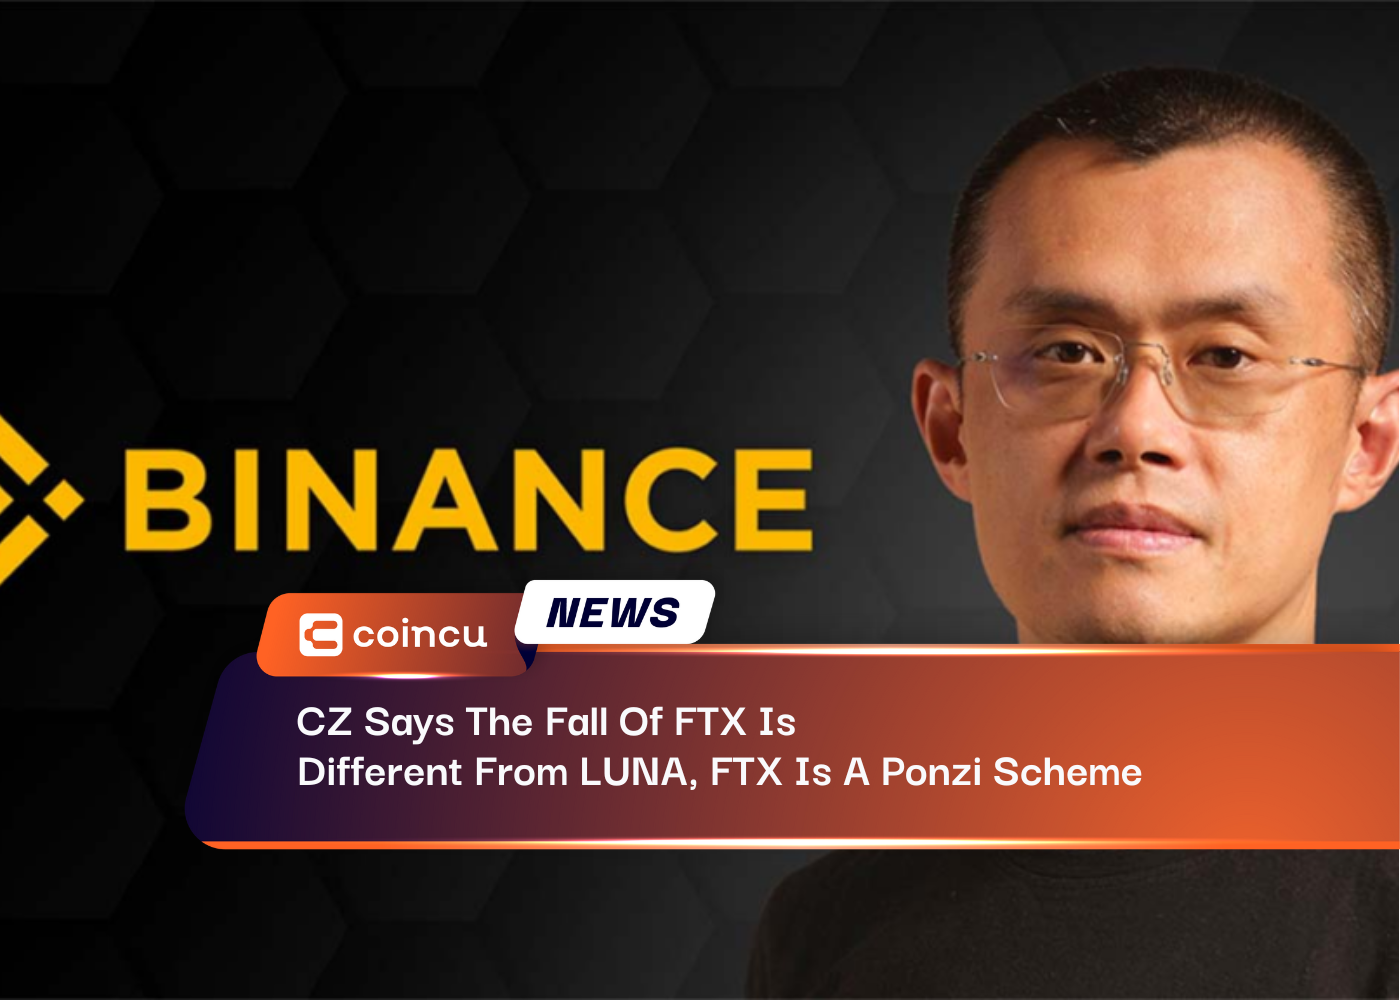 CZ Says The Fall Of FTX Is Different From LUNA, FTX Is A Ponzi Scheme